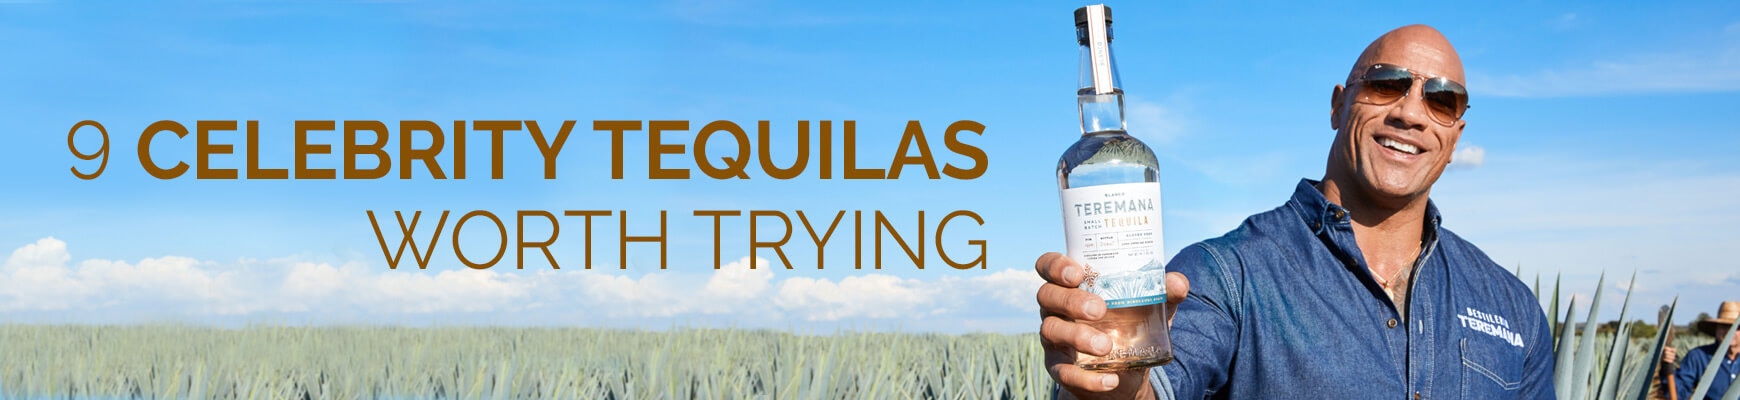 9 Celebrity Tequilas Worth Trying